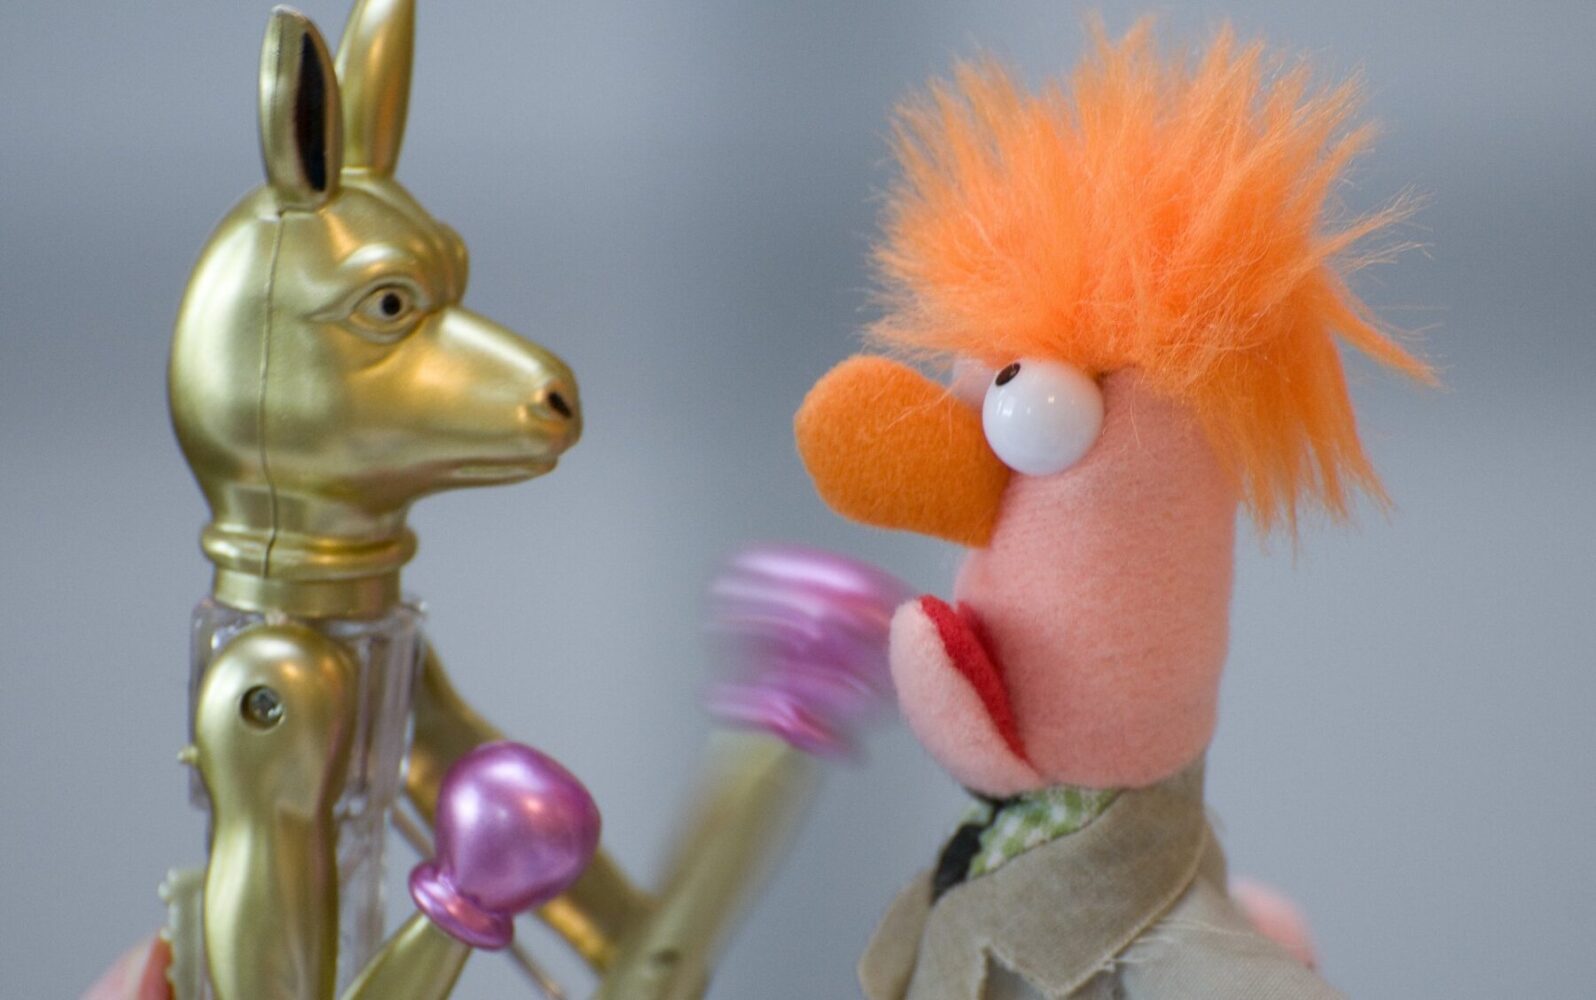 A toy kangaroo boxer punching a muppet in the face